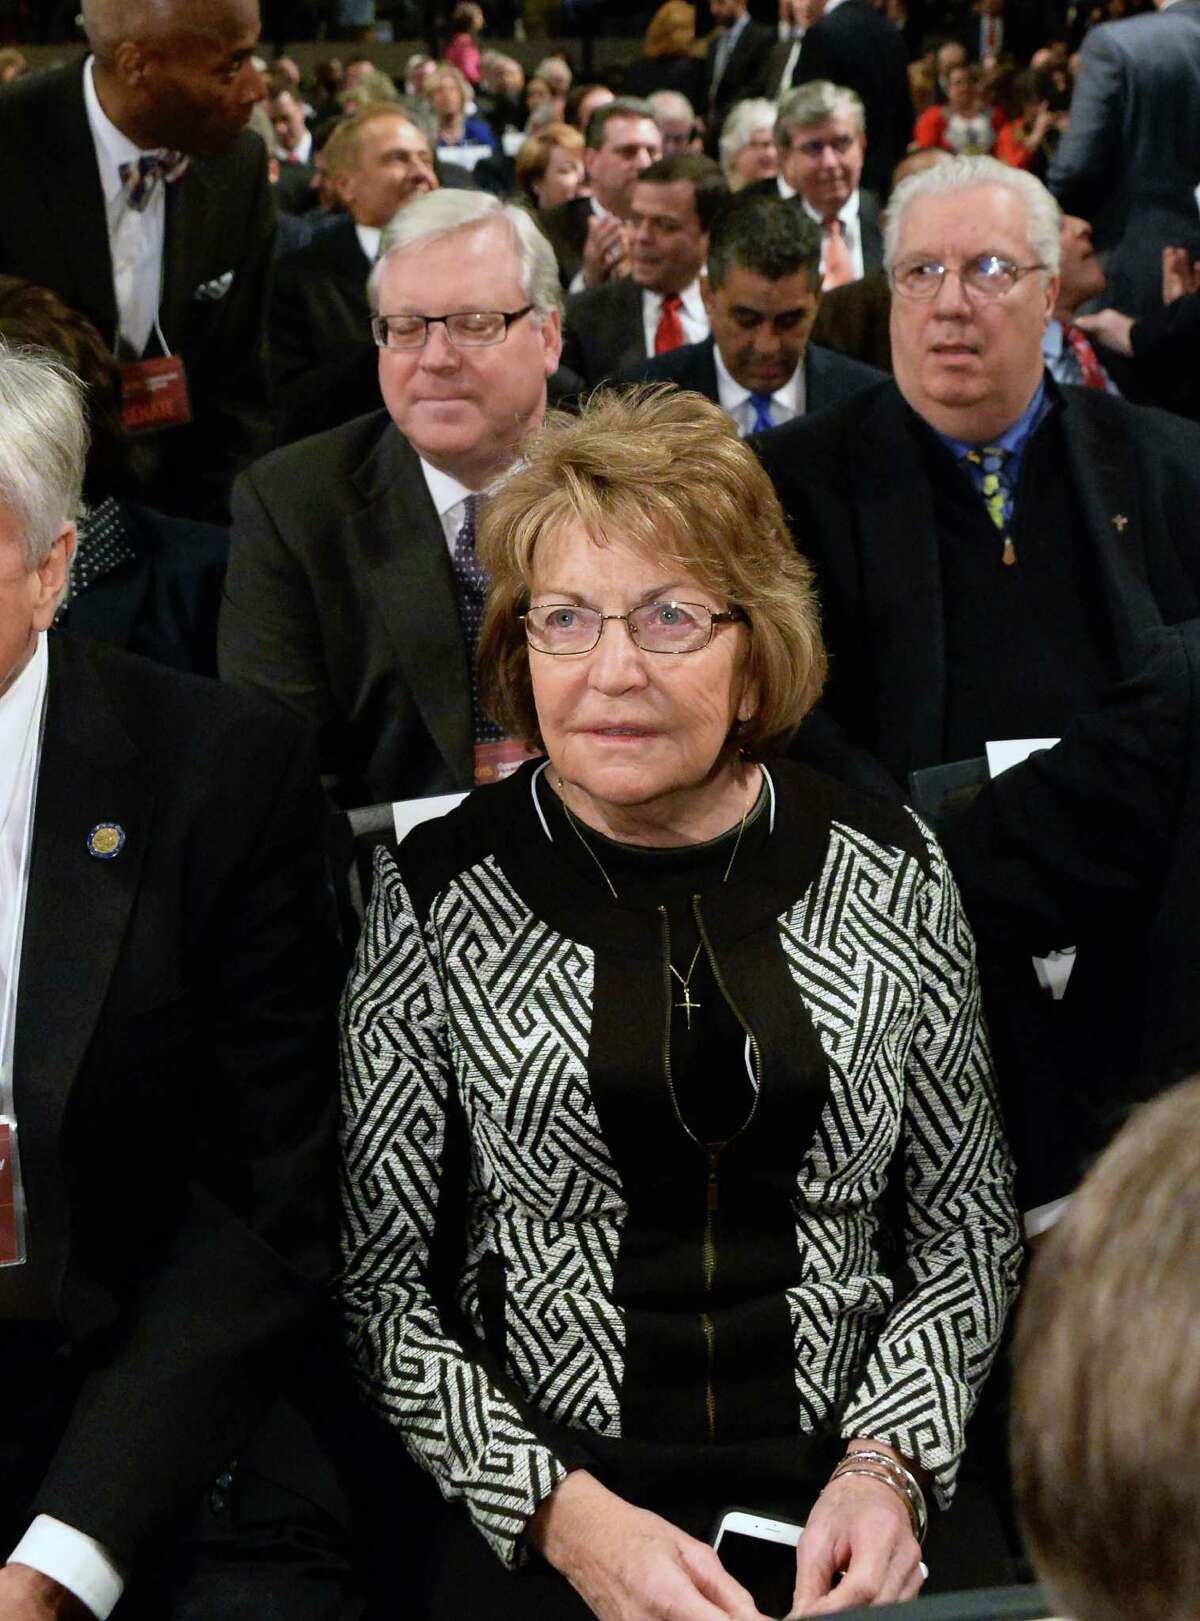 Sen. Betty Little attends Gov. Cuomo's State of the State address and budget proposal Wednesday Jan. 21, 2015, at the Empire State Plaza Convention Center in Albany, N.Y. (John Carl D'Annibale / Times Union archive)